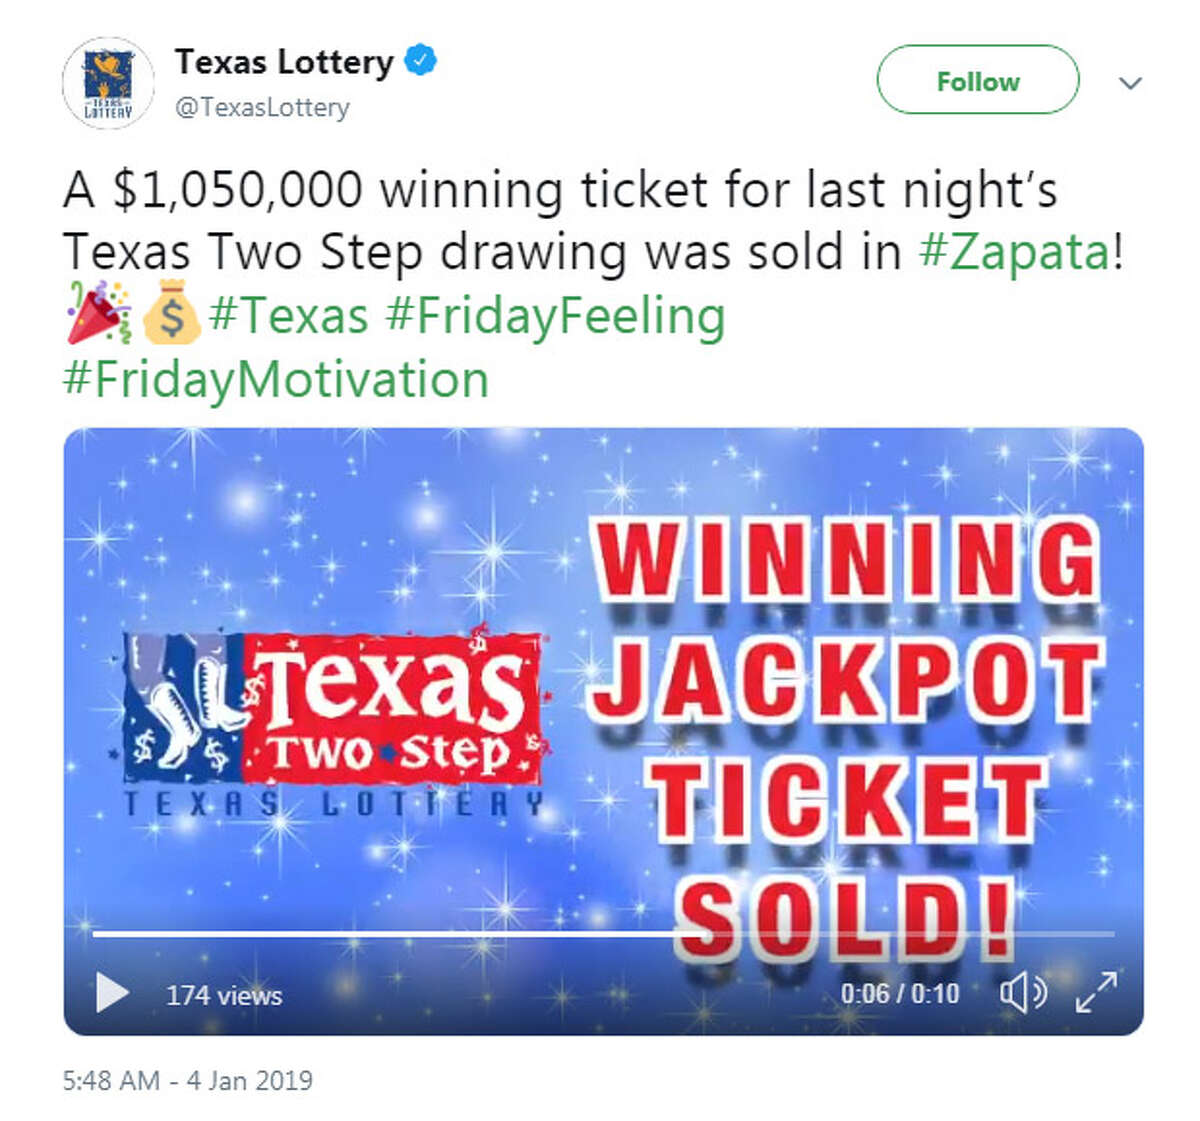 Someone in Zapata just won over $1 million, the Texas Lottery said Thursday.